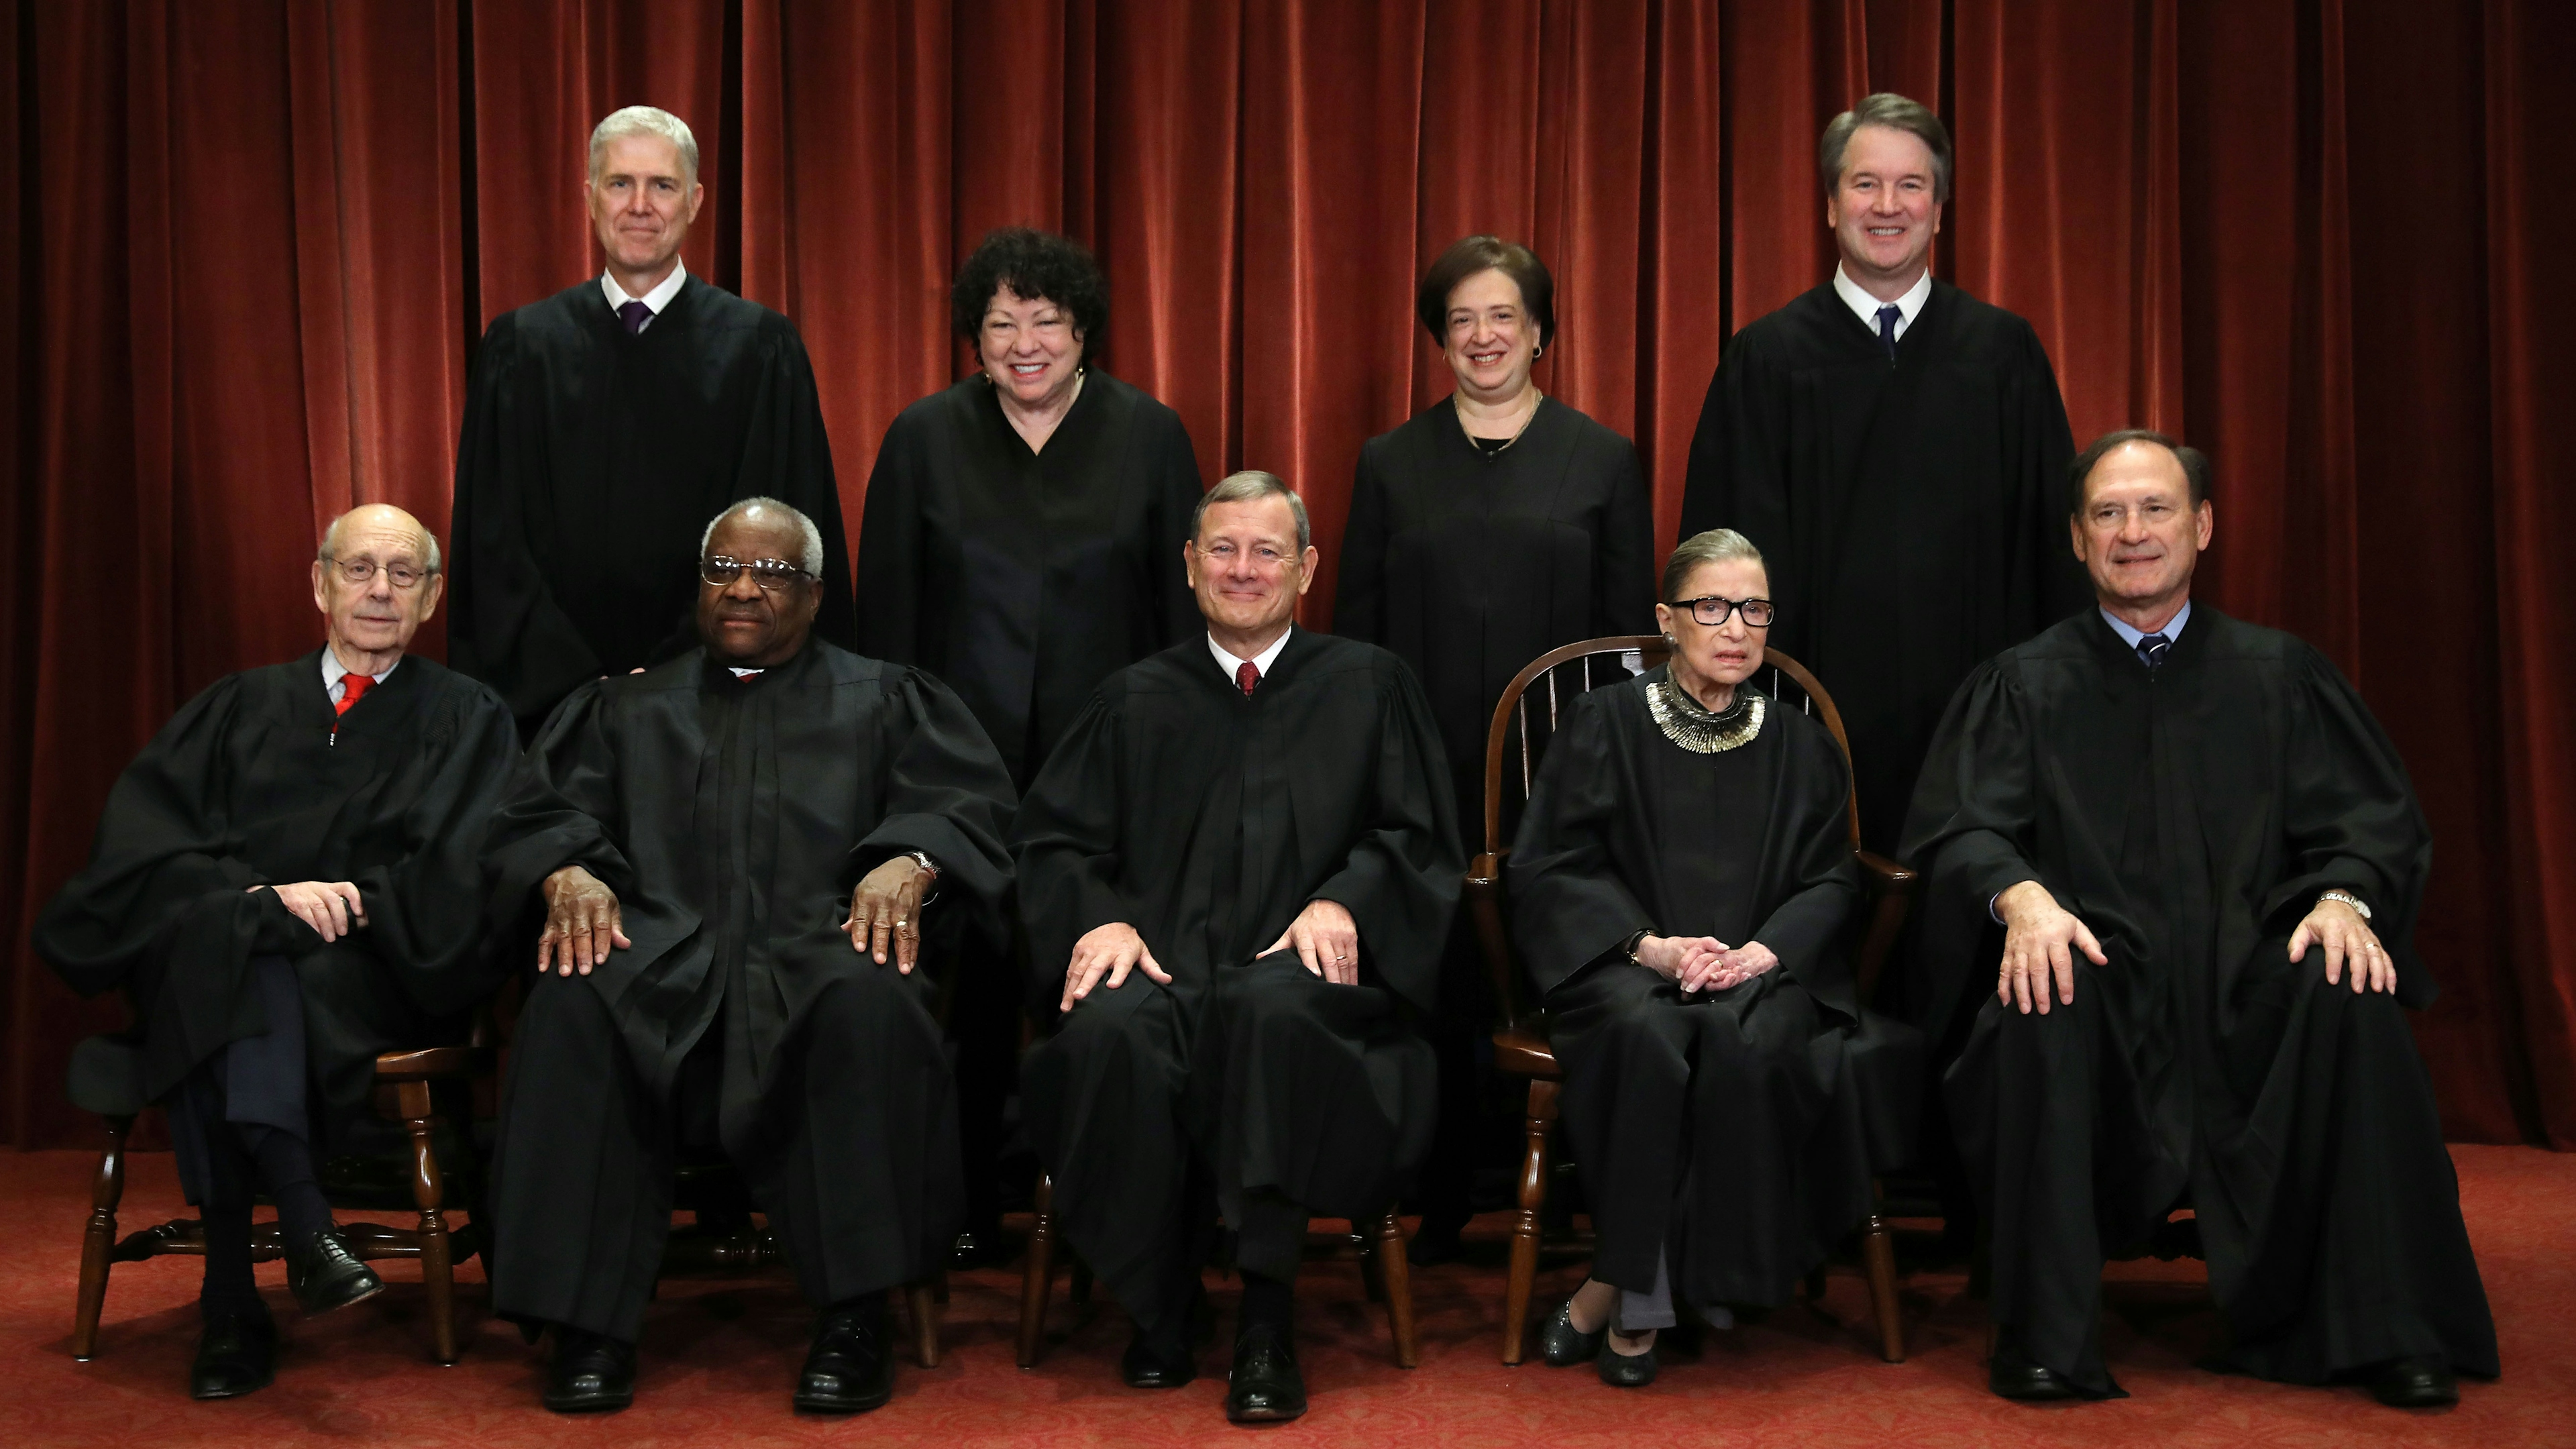 Justices pose for their official portrait at the in the East Conference Room at the Supreme Court building November 30, 2018